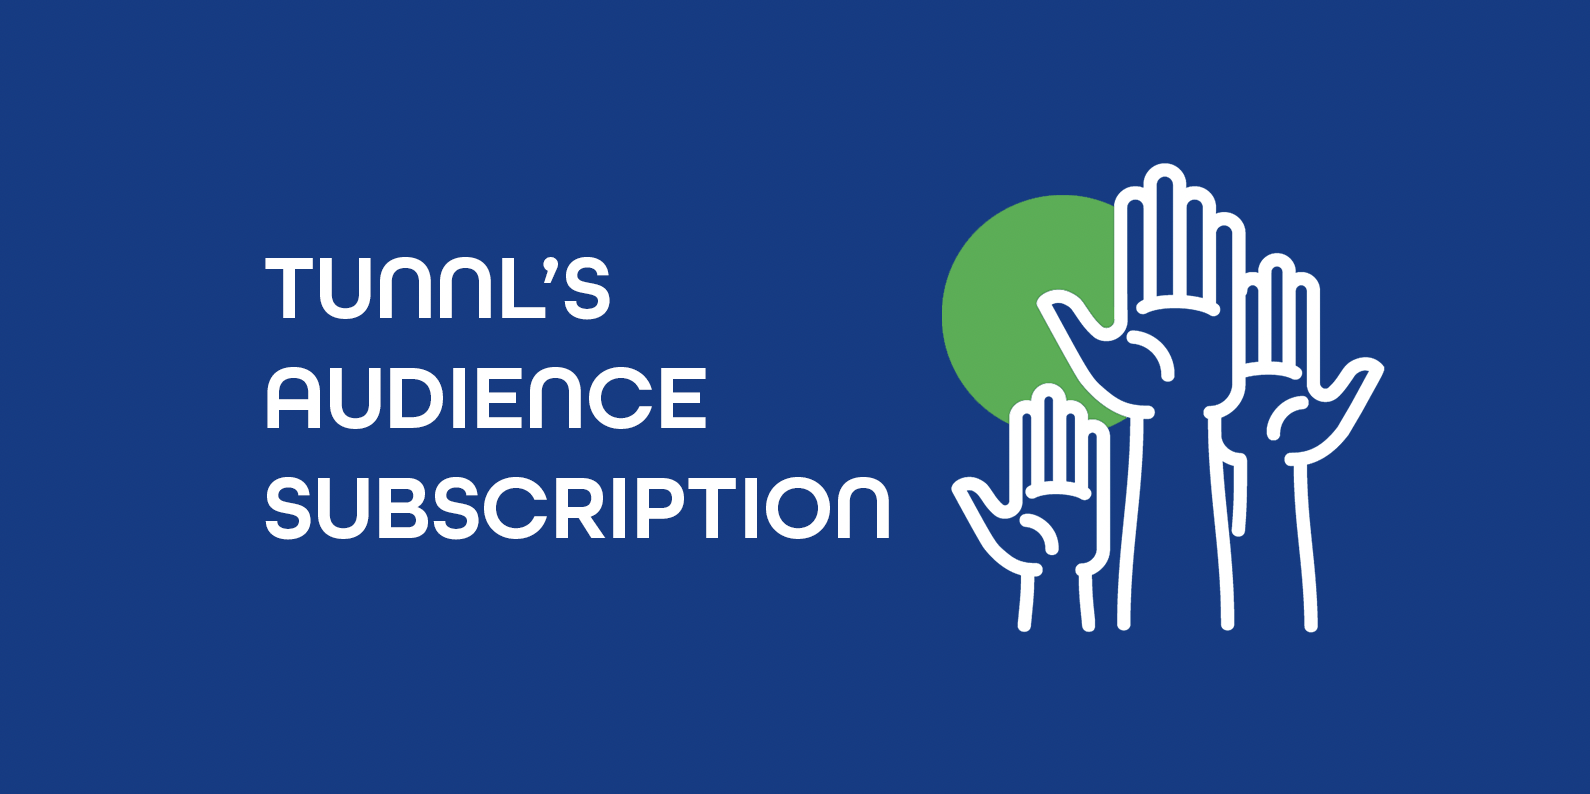 Tunnl's Audience Subscription: What Is It and What Does It Include?